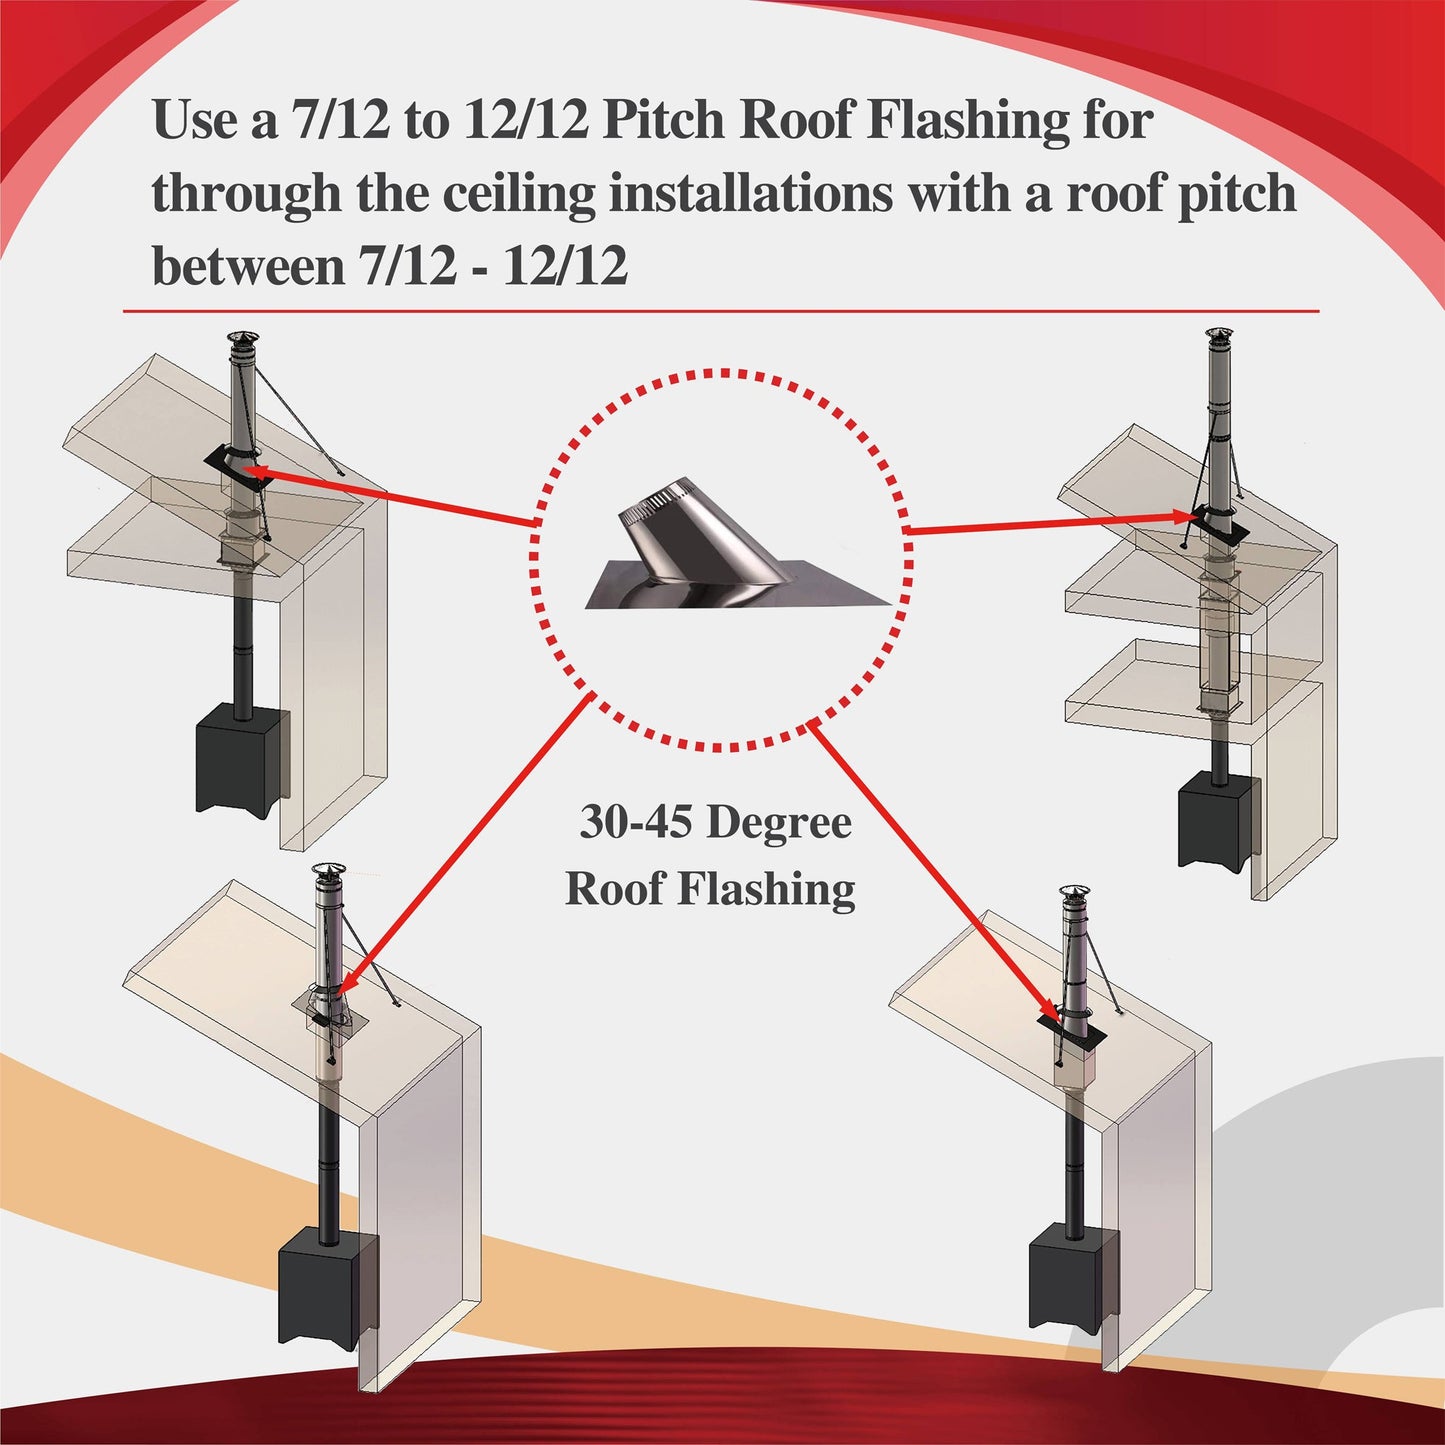 Pitch Roof Flashing 7/12 to 12/12 for 8" Inner Diameter Chimney Pipe